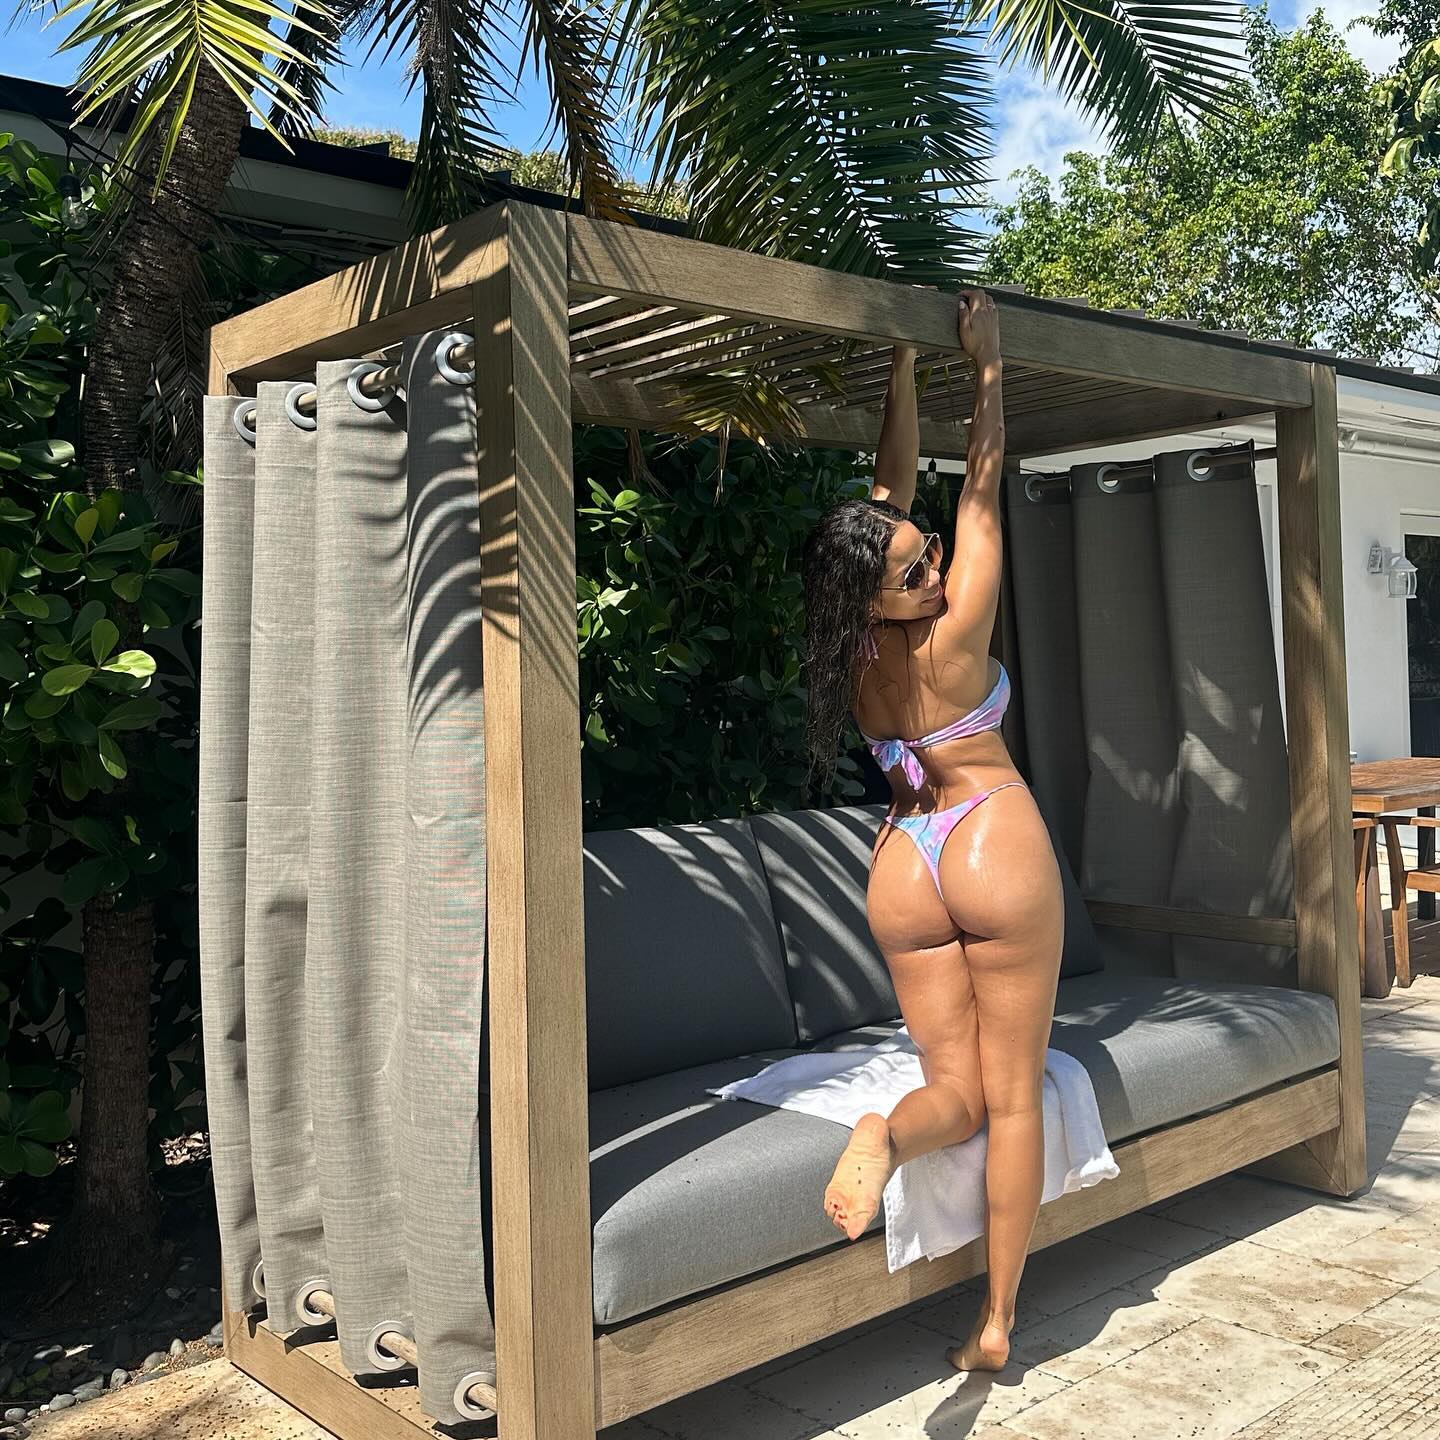 The 28-year-old dropped several bikini snaps after visiting Miami